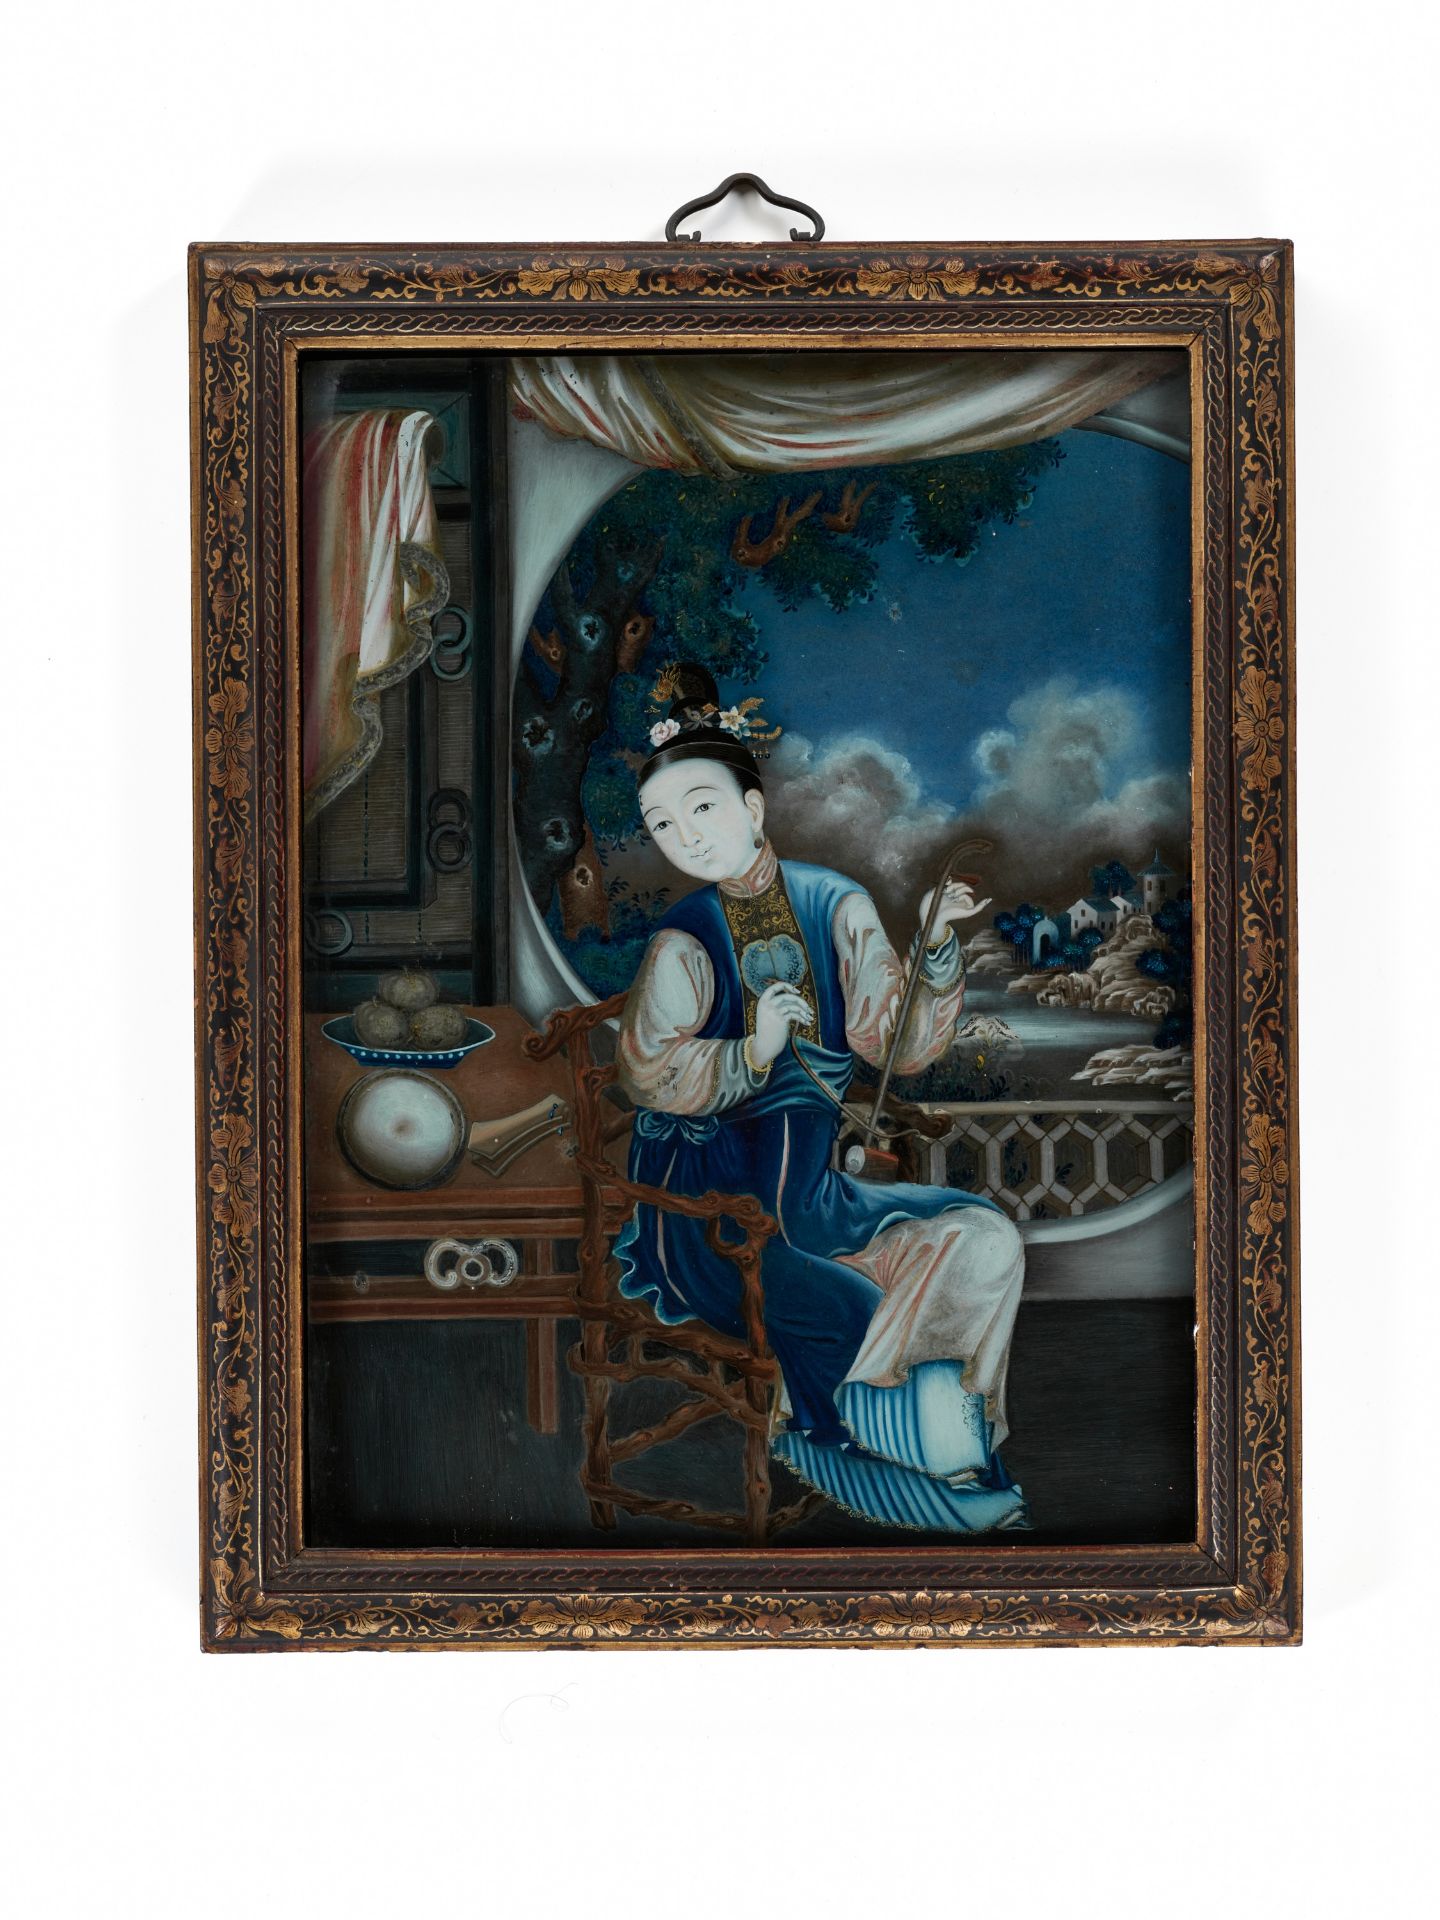 A REVERSE-GLASS PAINTING OF A LADY PLAYING THE HUQIN, QING DYNASTY